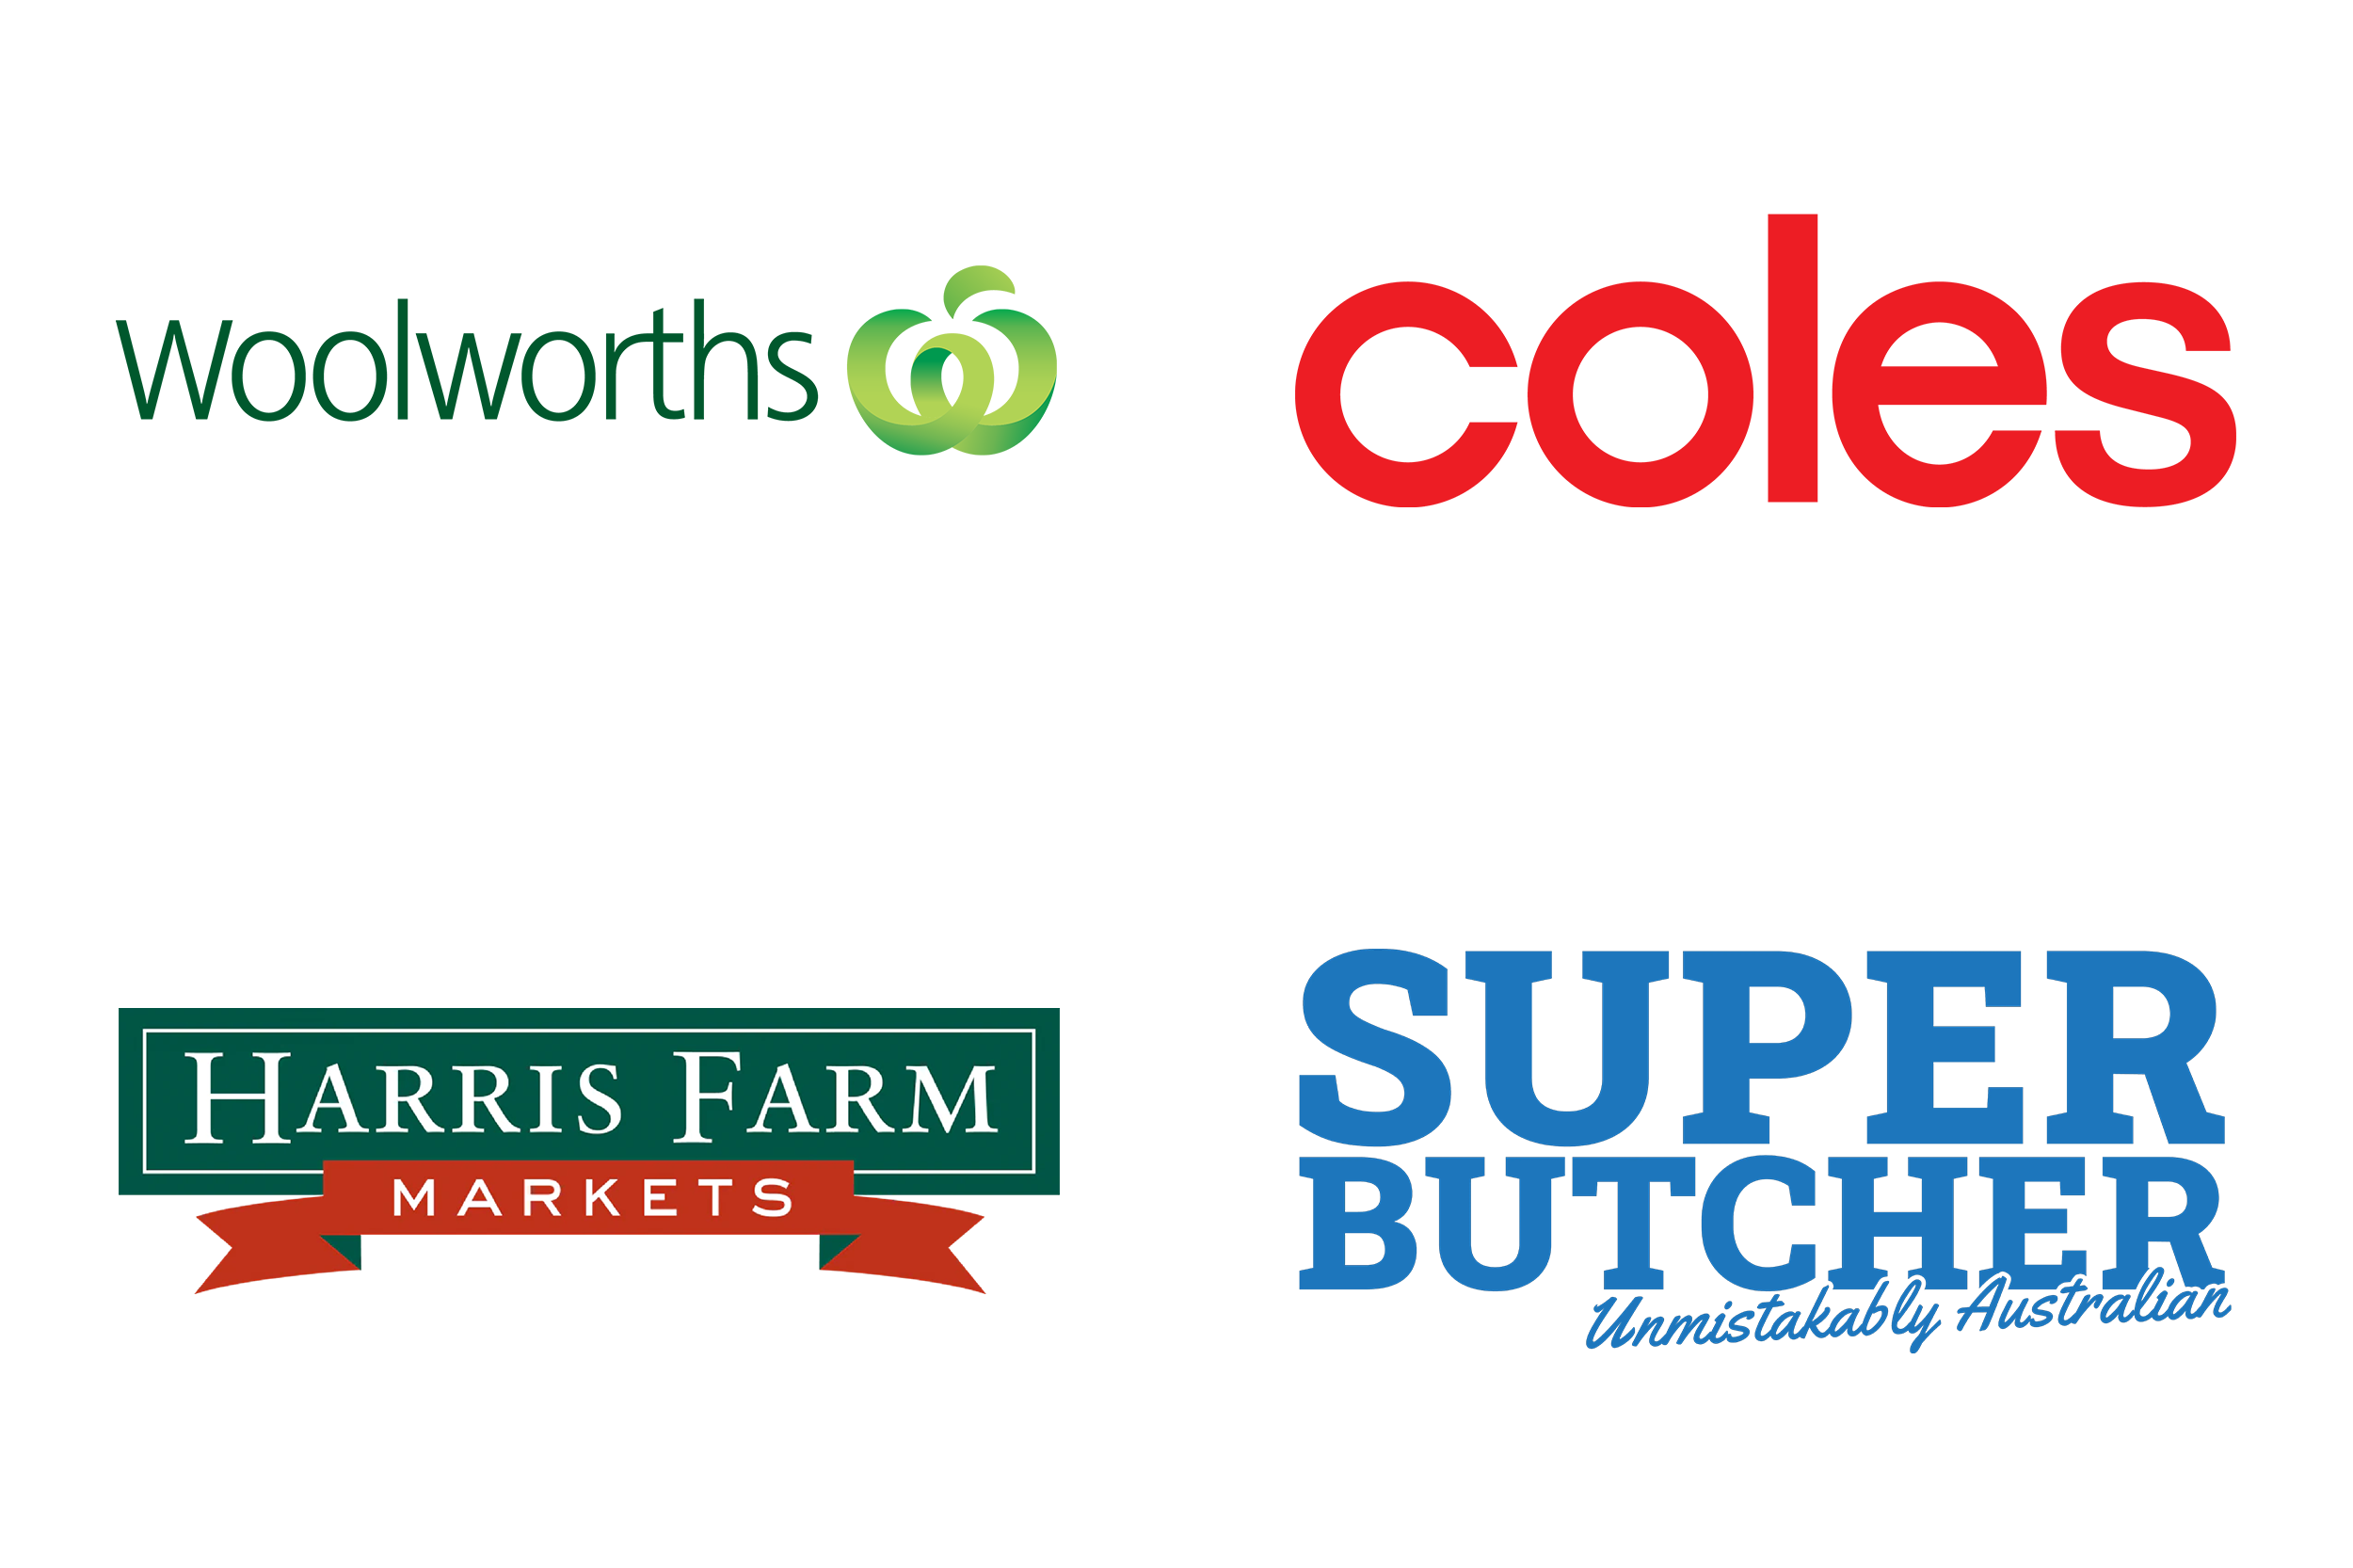 Woolworths, Coles, Harris Farm and Super Butcher Logos